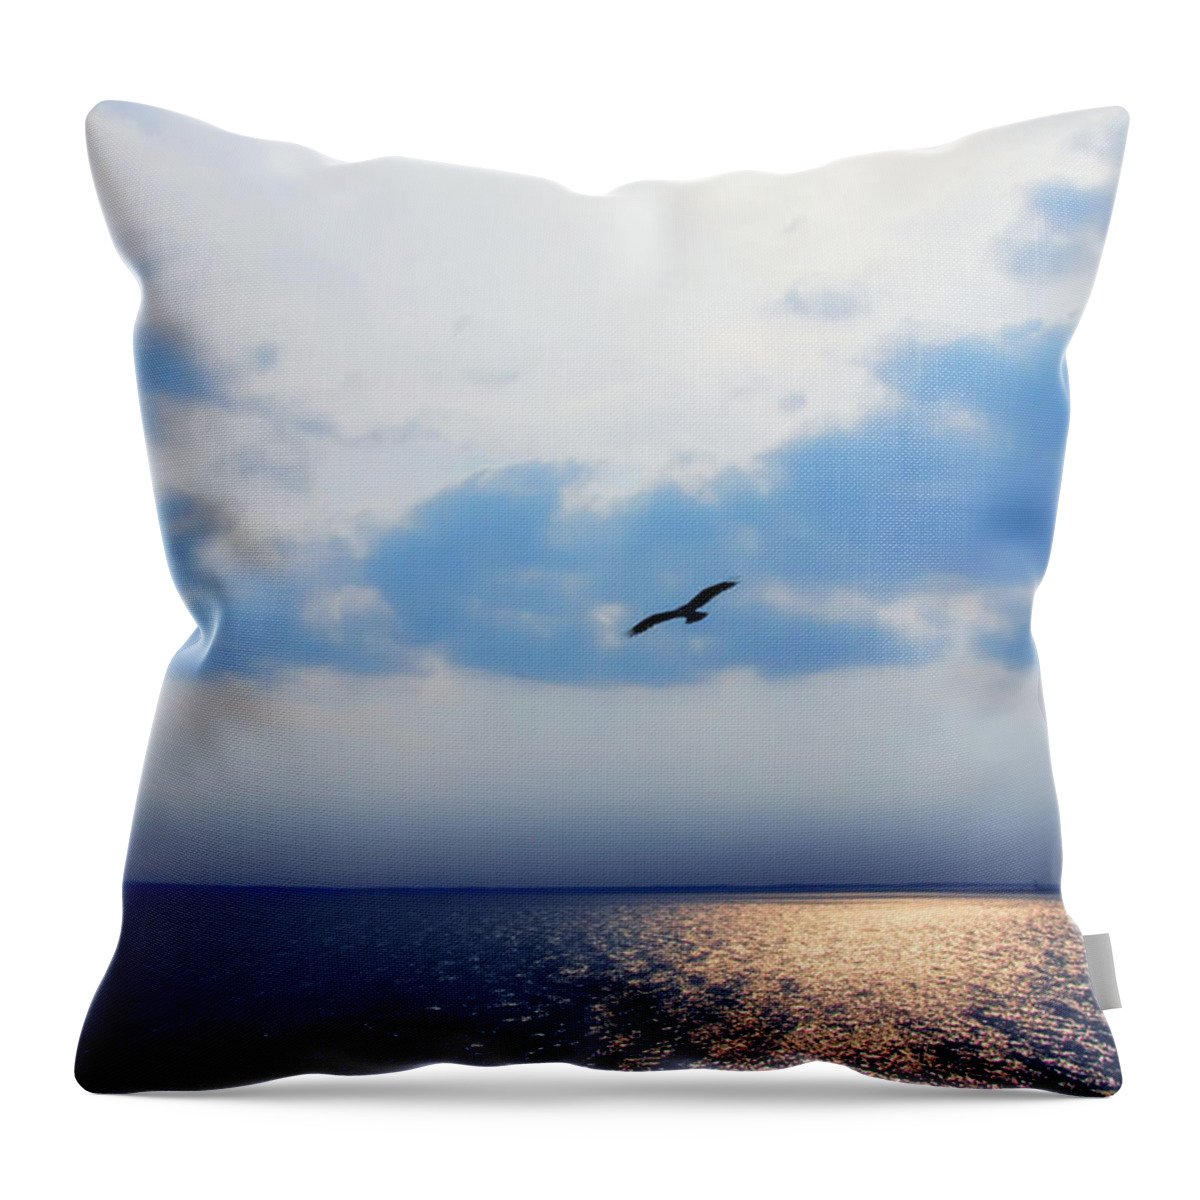 Osprey On The Potomac River Throw Pillow featuring the digital art Osprey on the Potomac River by Bill Cannon